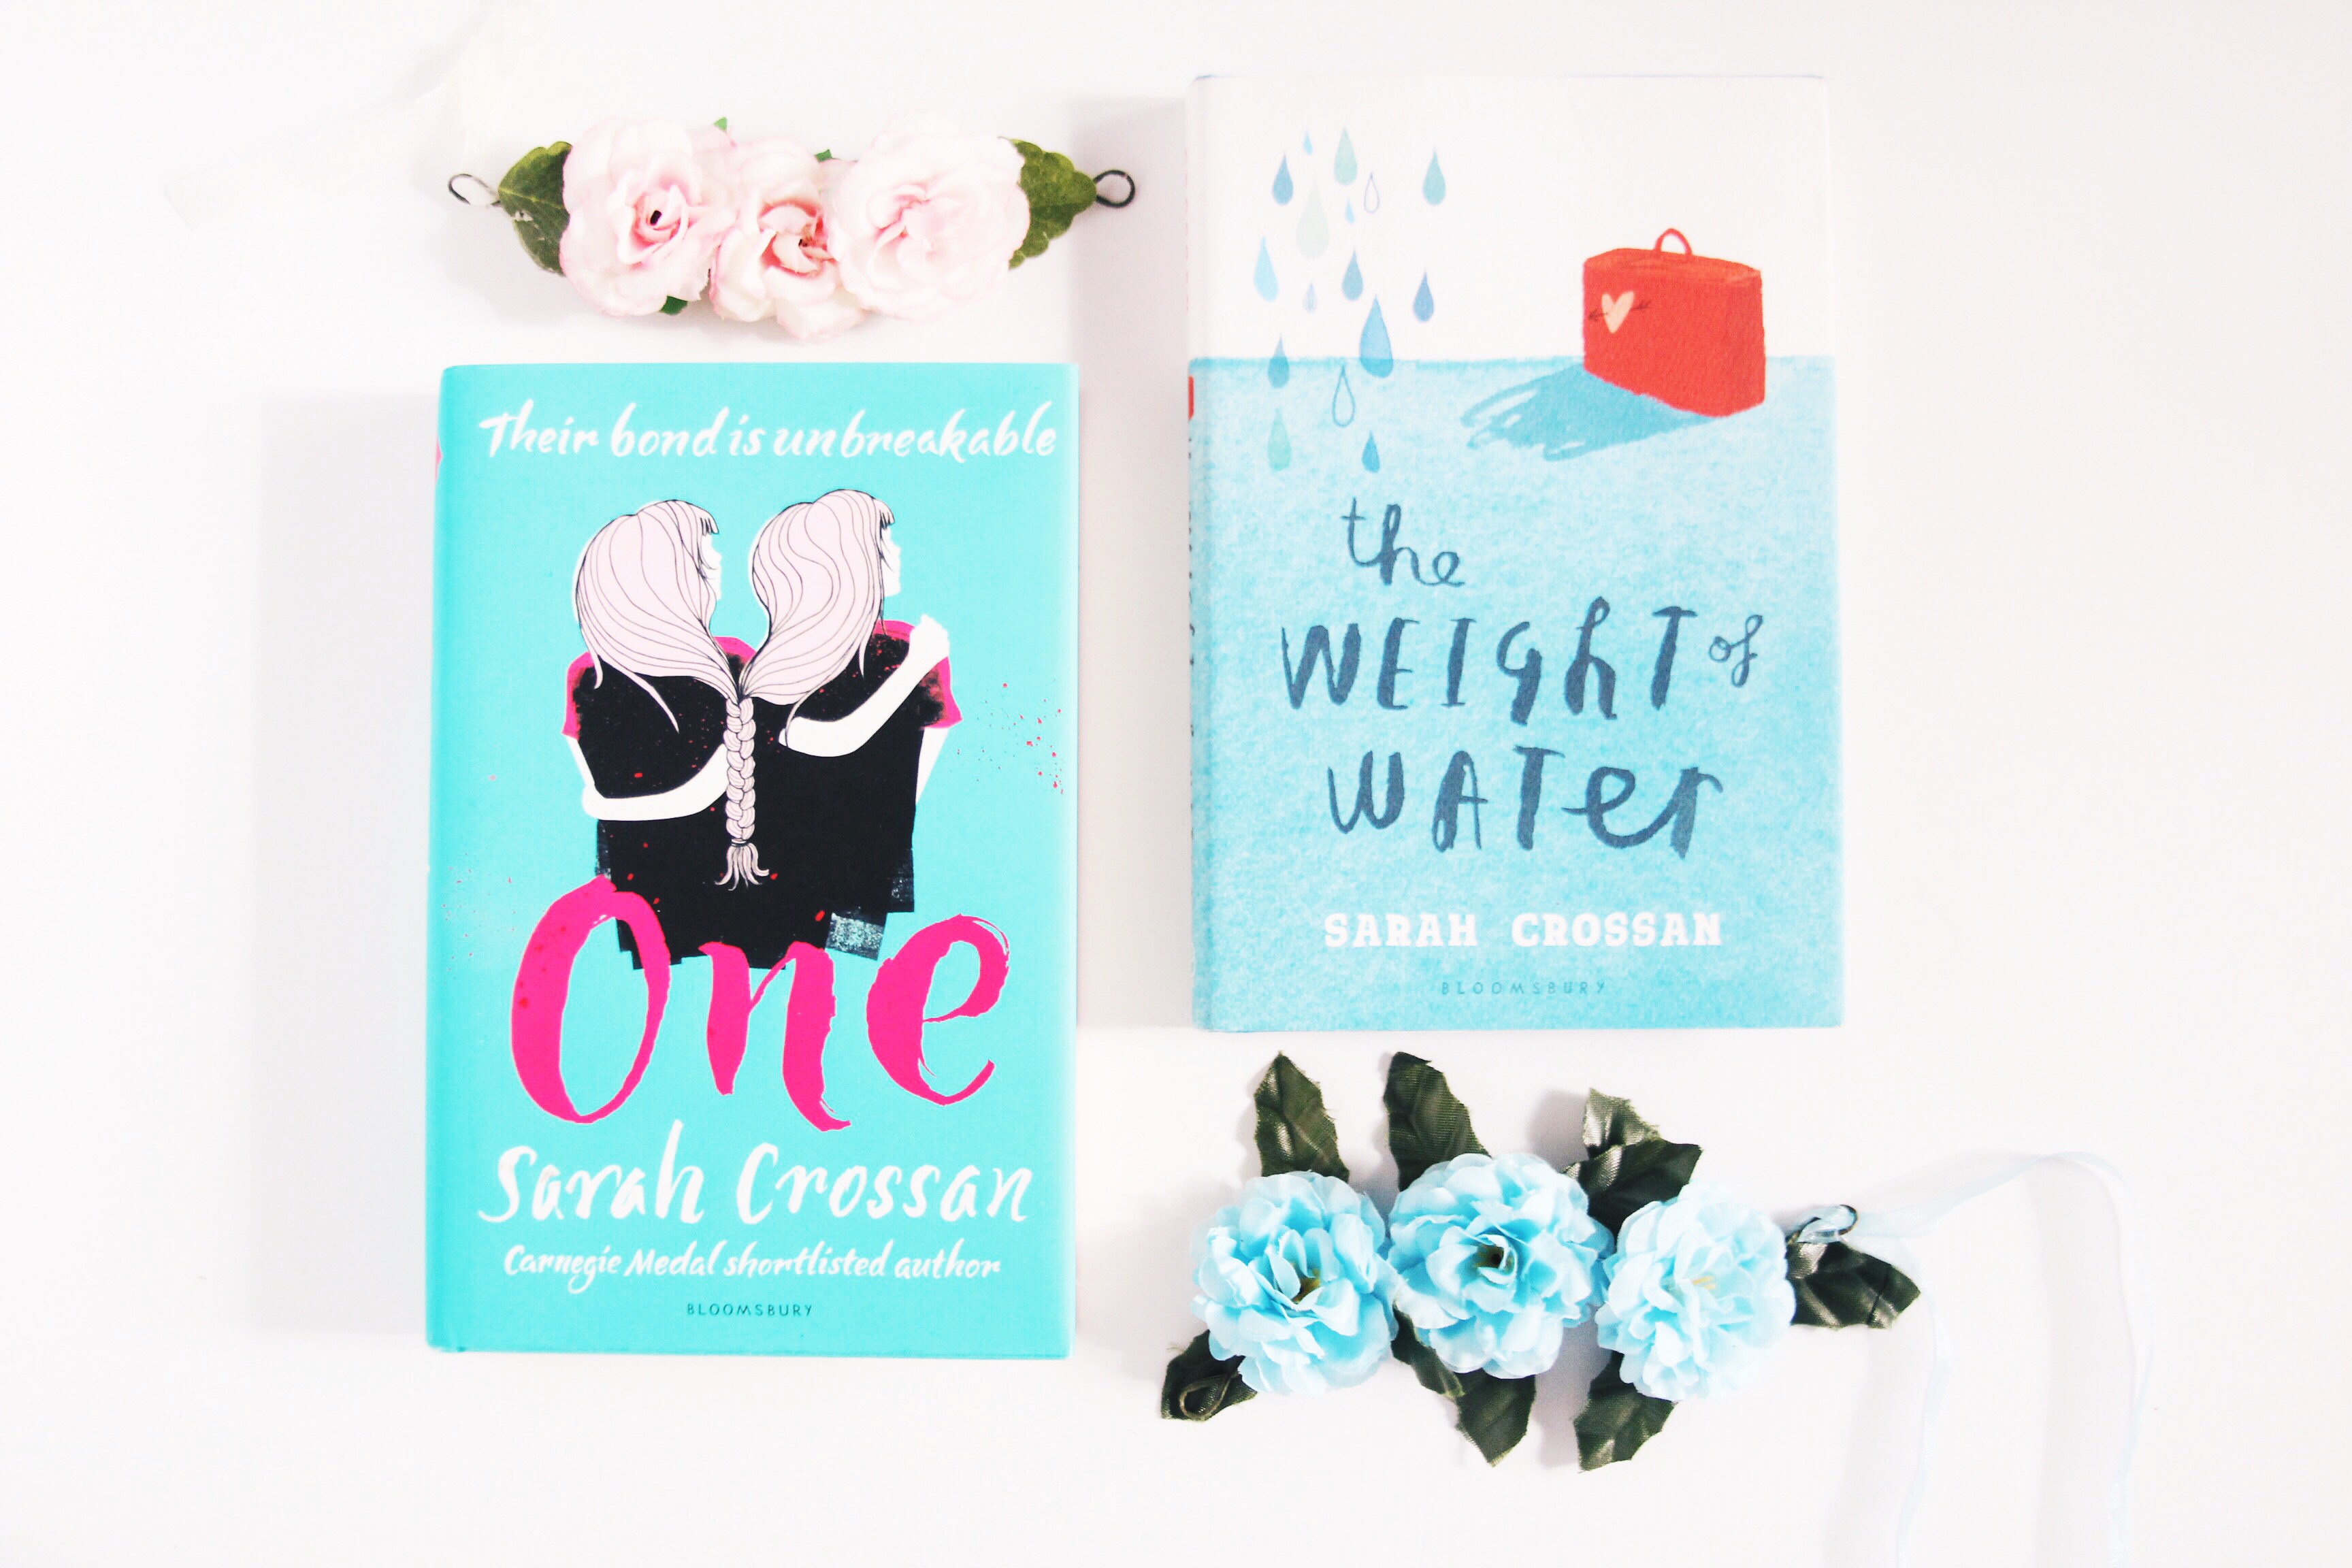 one-and-the-weight-of-water-by-sarah-crossan